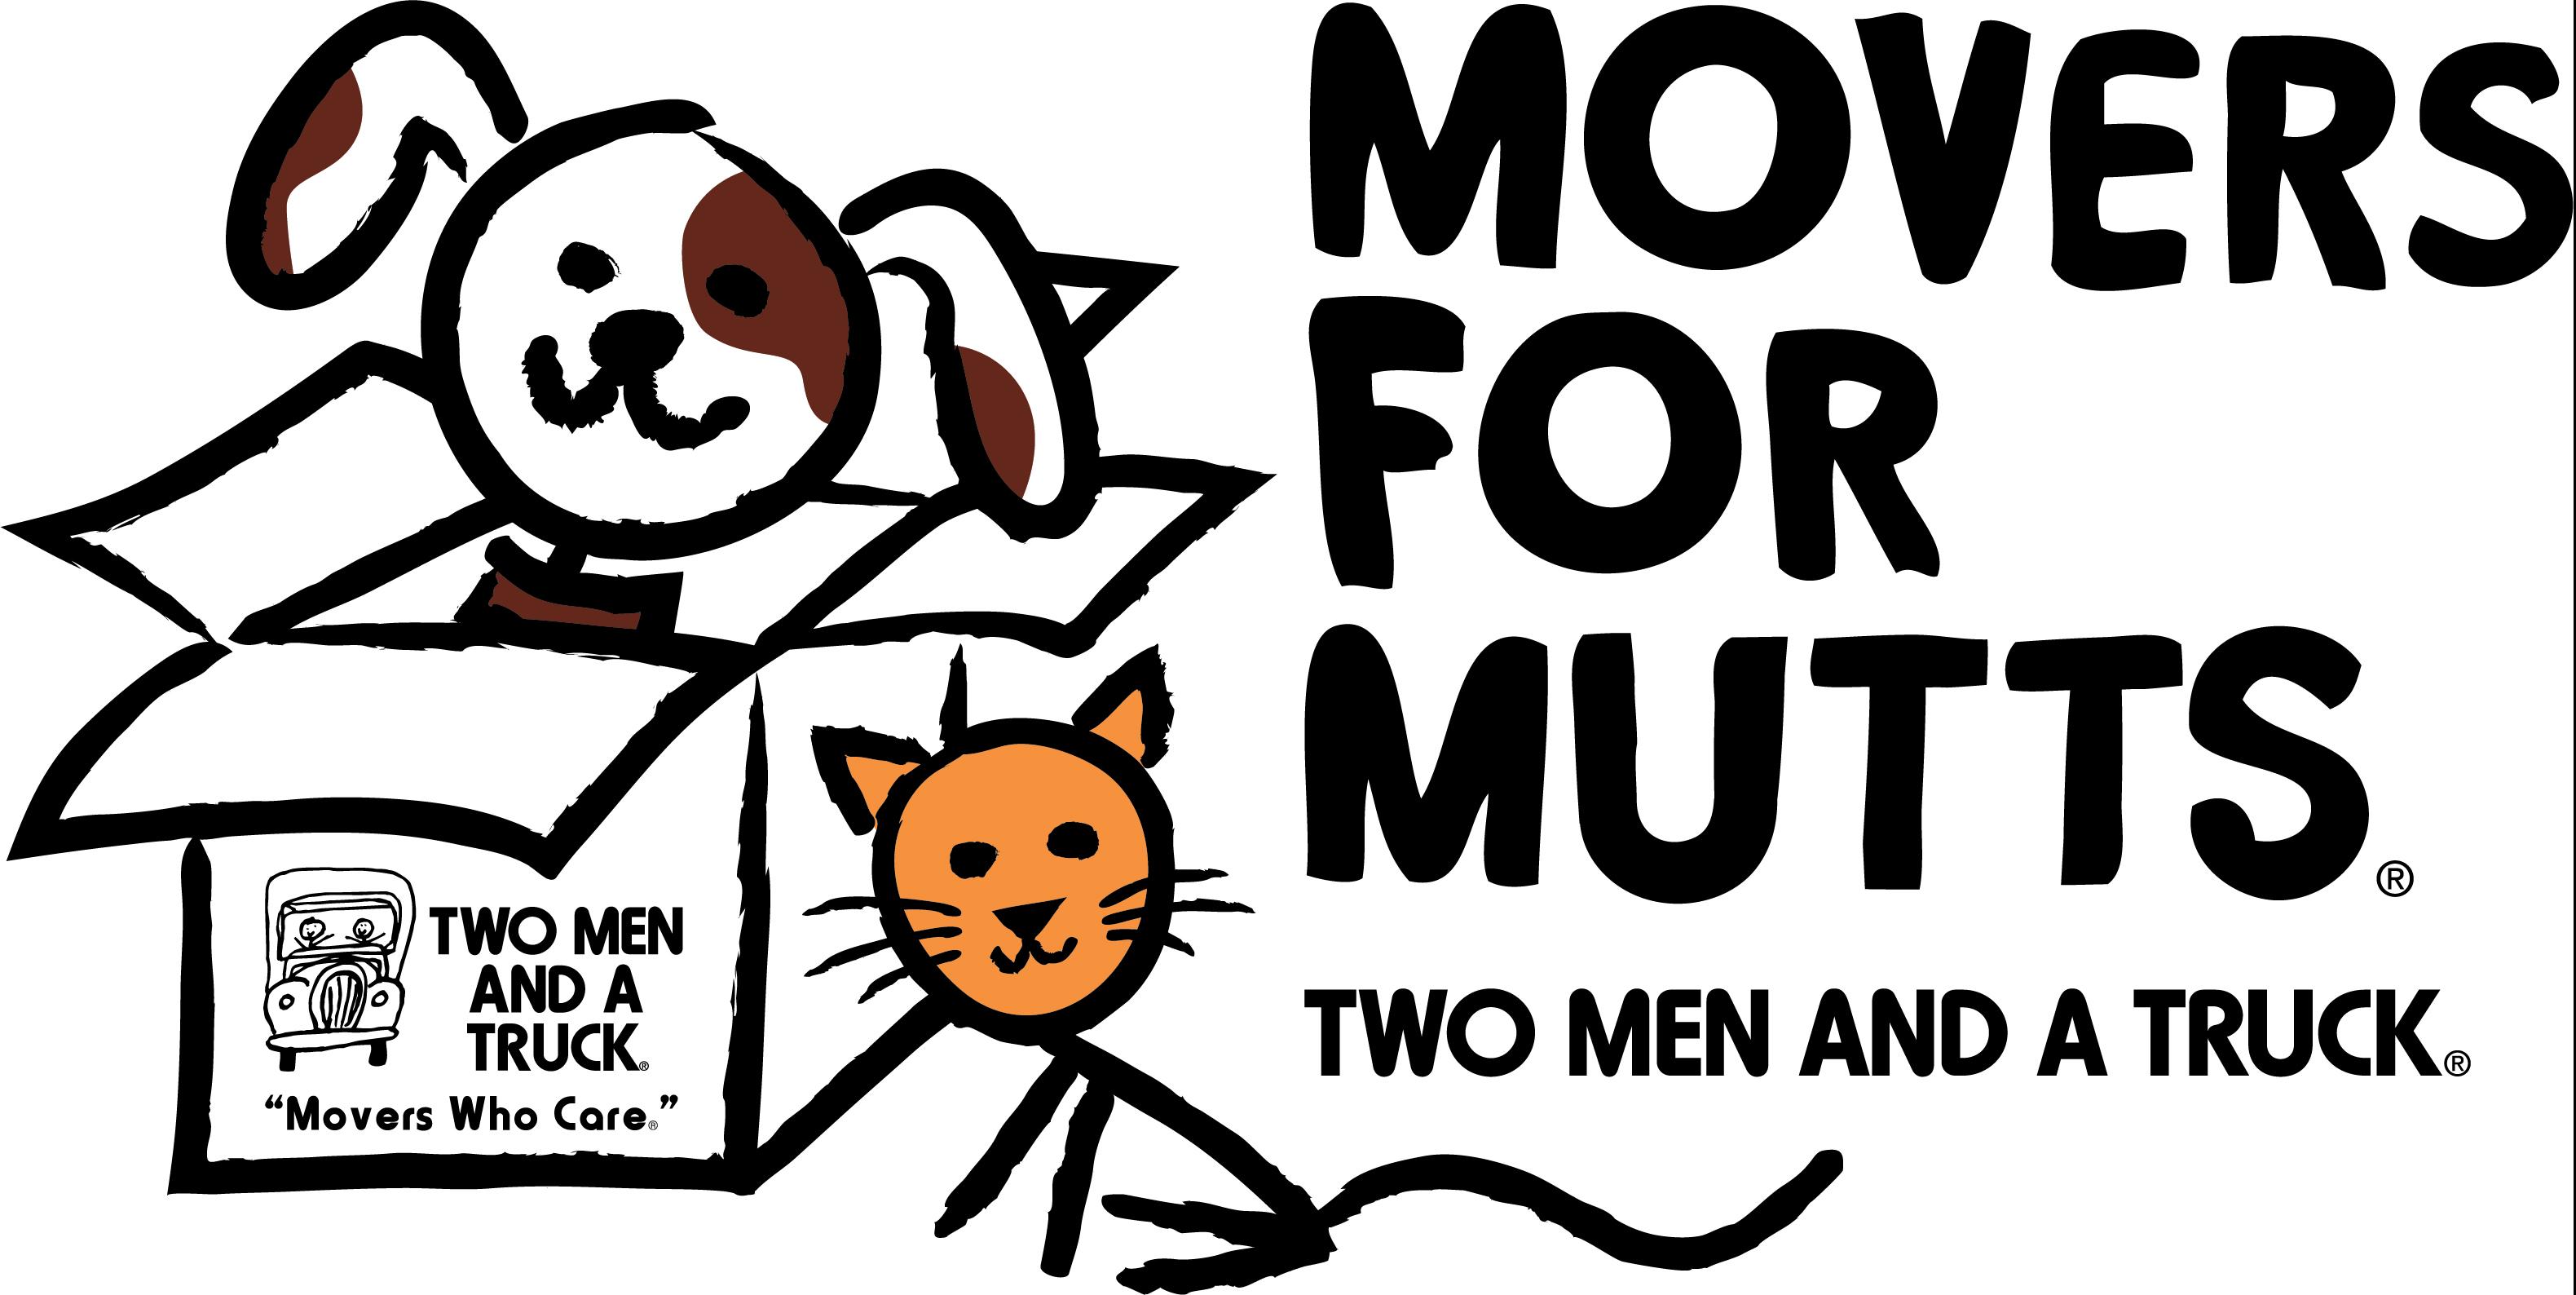 Movers for Mutts Final 